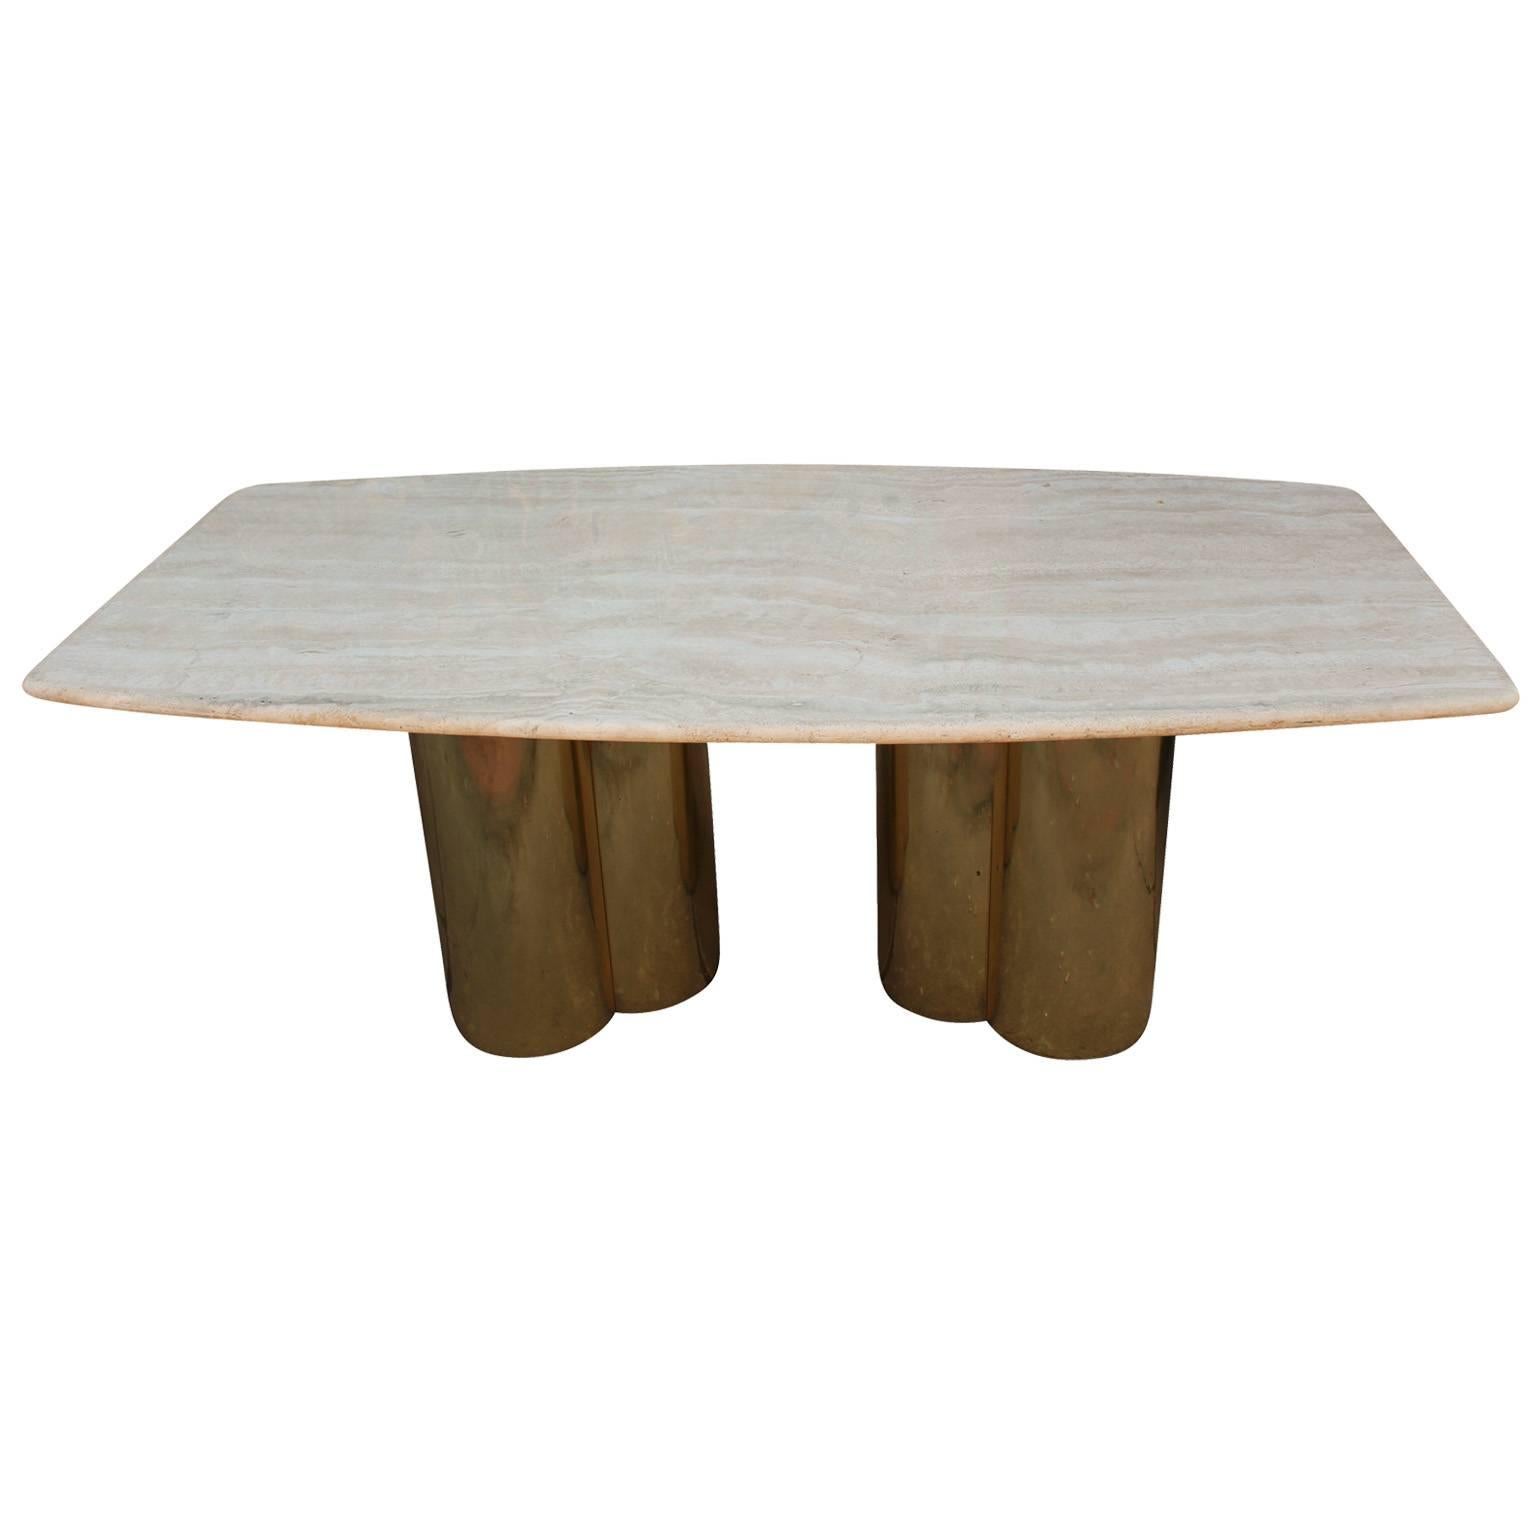 Luxe travertine topped dining table. Boat shaped travertine top has a lovely grain. Top rests upon two shiny brass, trefoil shaped bases. The perfect hollywood regency style dining table. The brass pedestals are believe to be made by Curtis Jere.